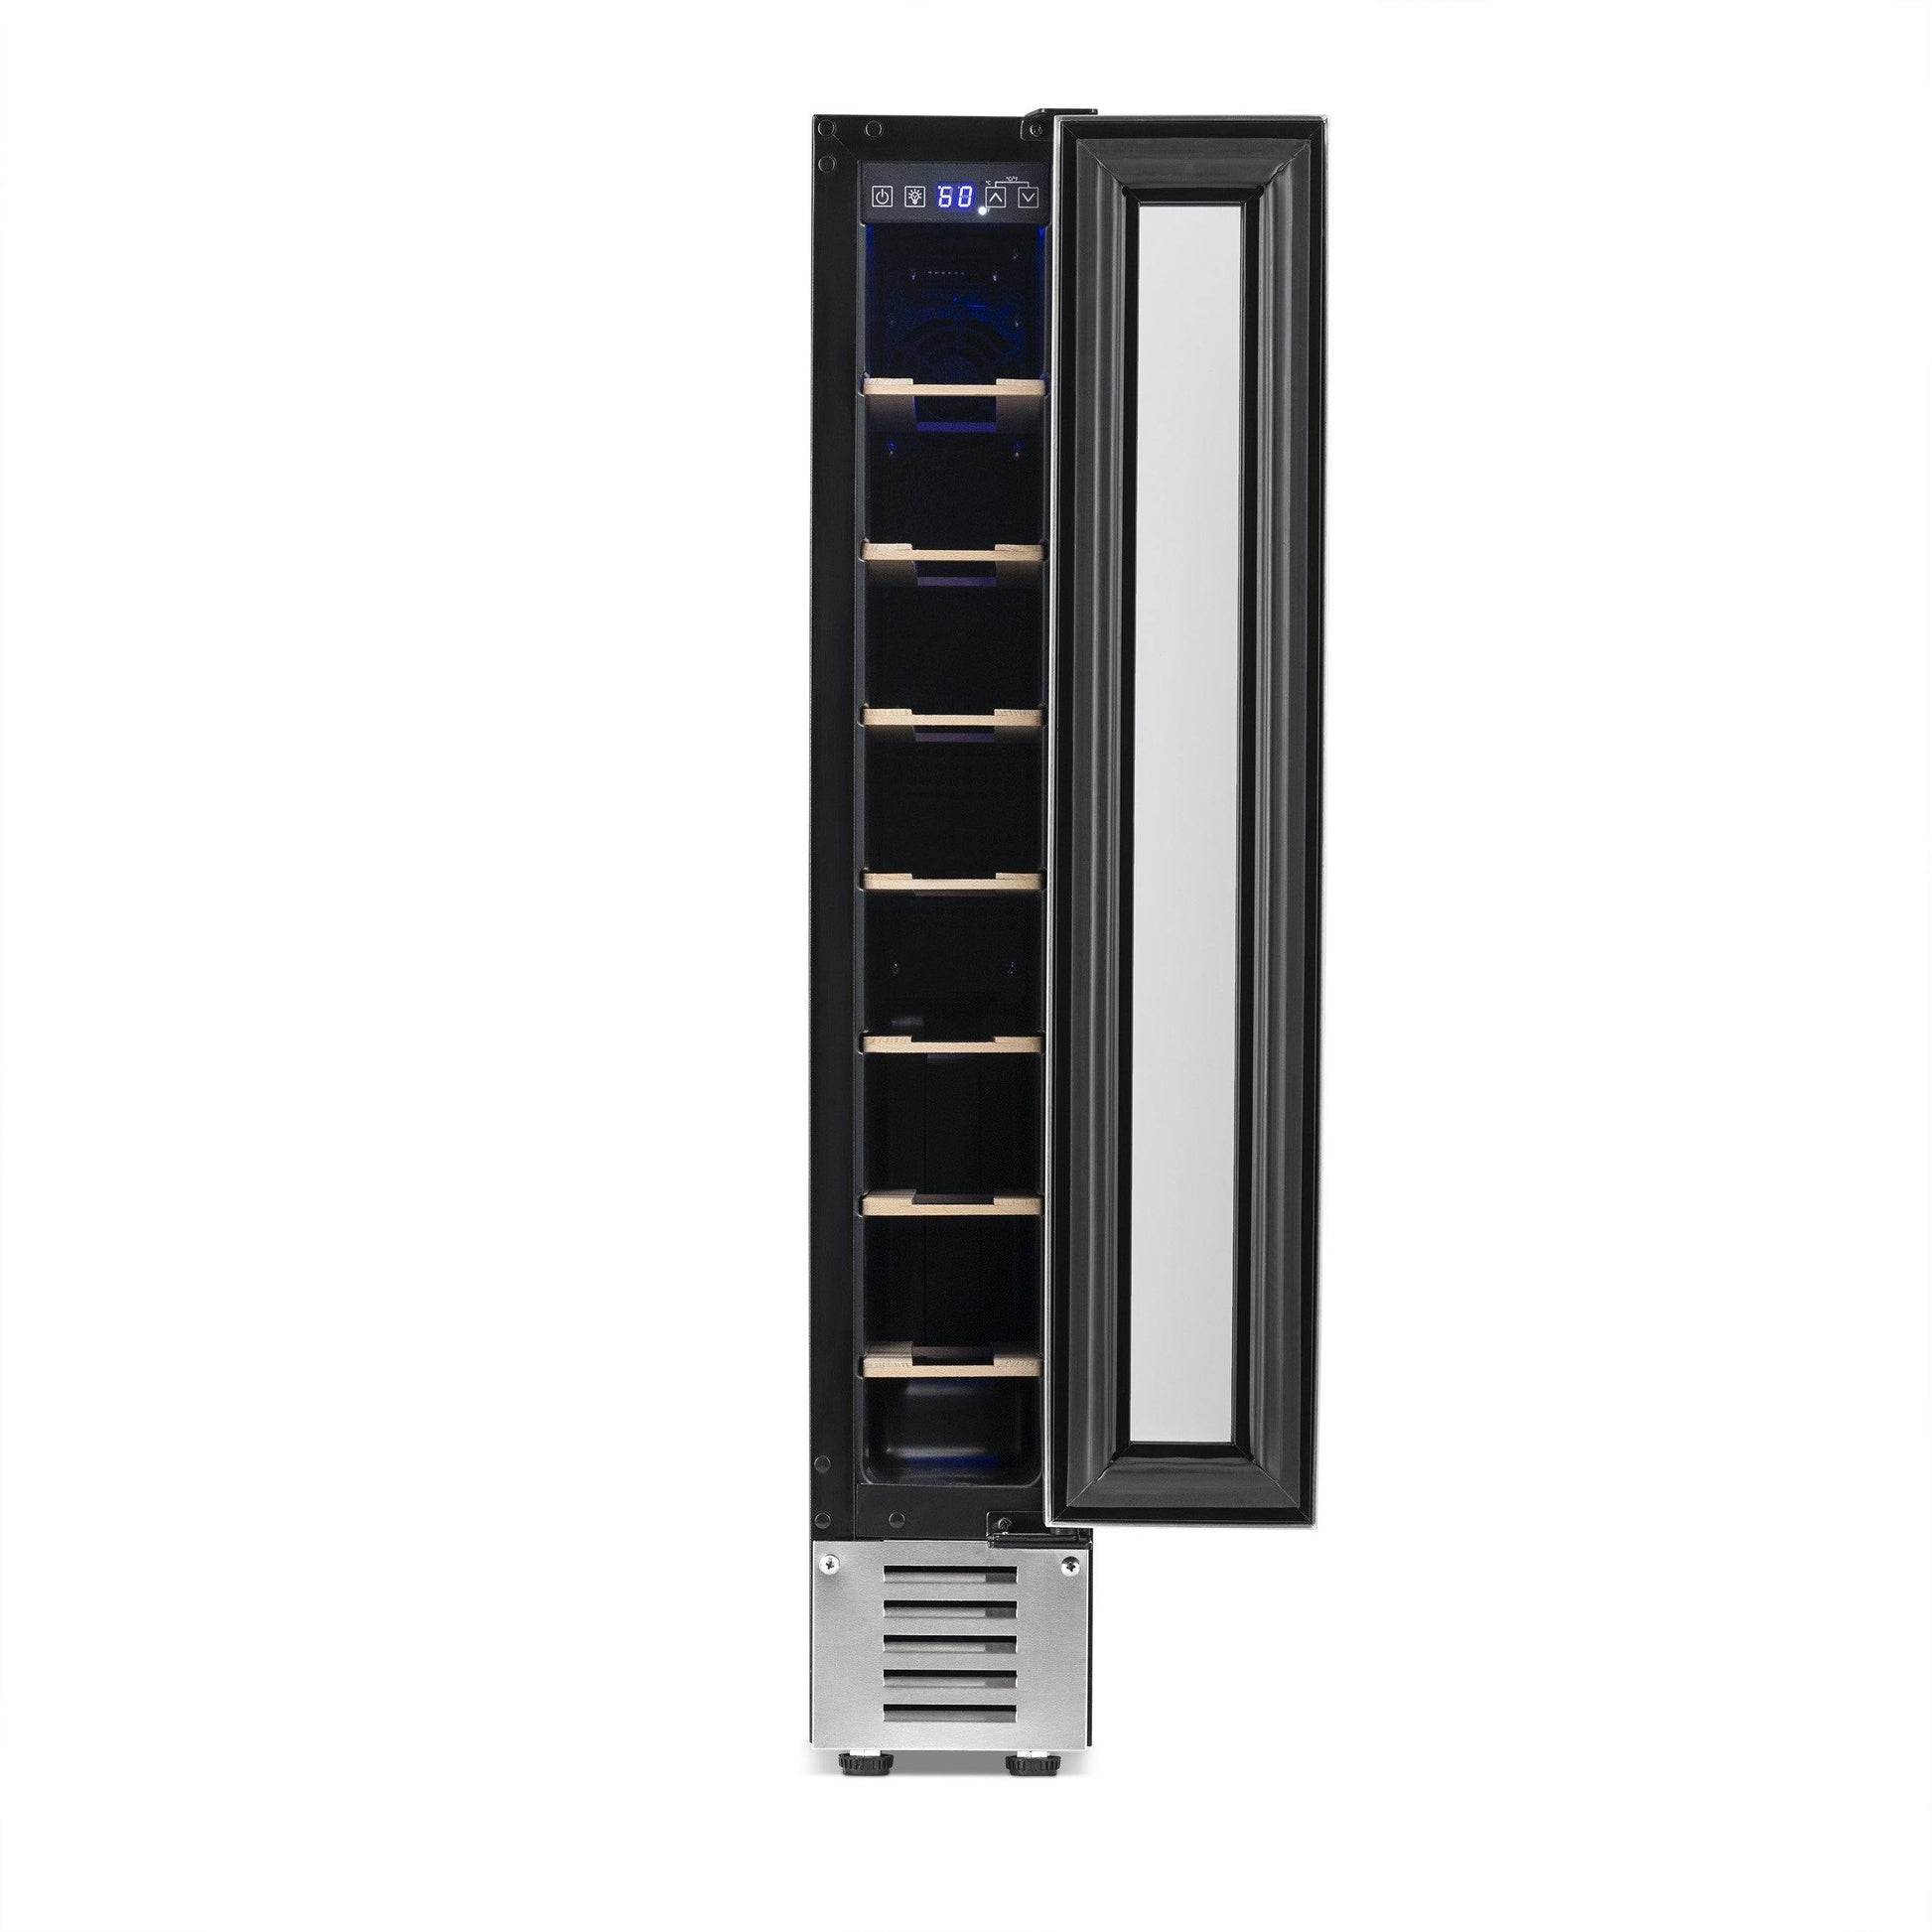 Newair 6" Built-In 7 Bottle?Compressor?Wine Fridge?in Stainless Steel, Compact Size with Precision Digital Thermostat and Premium Beech?Wood Shelves??